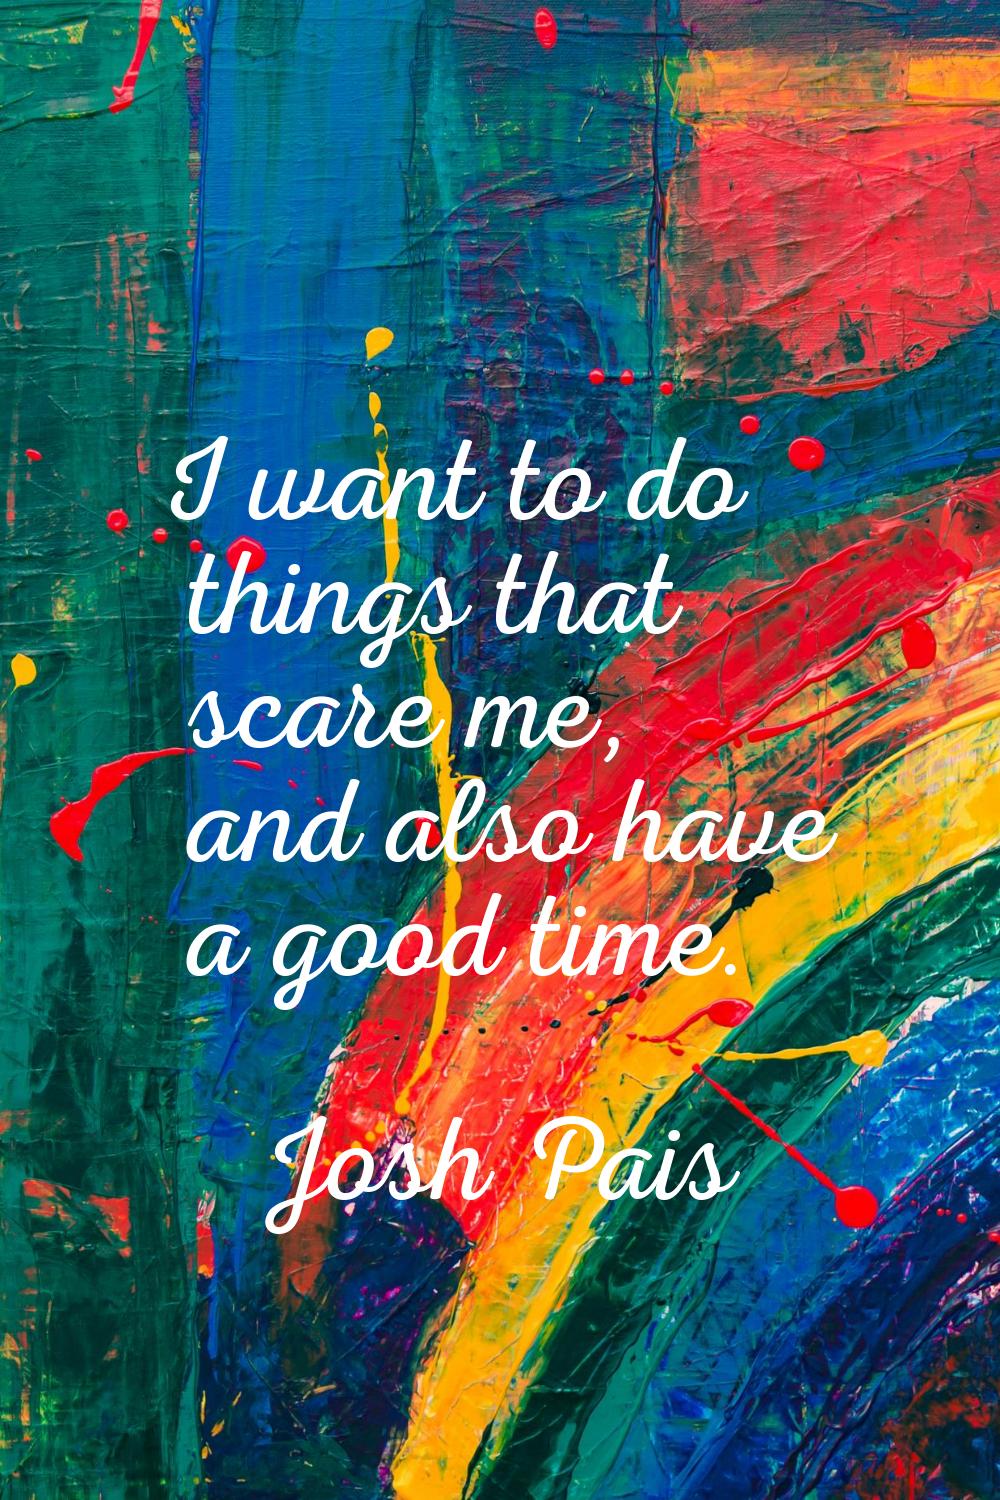 I want to do things that scare me, and also have a good time.